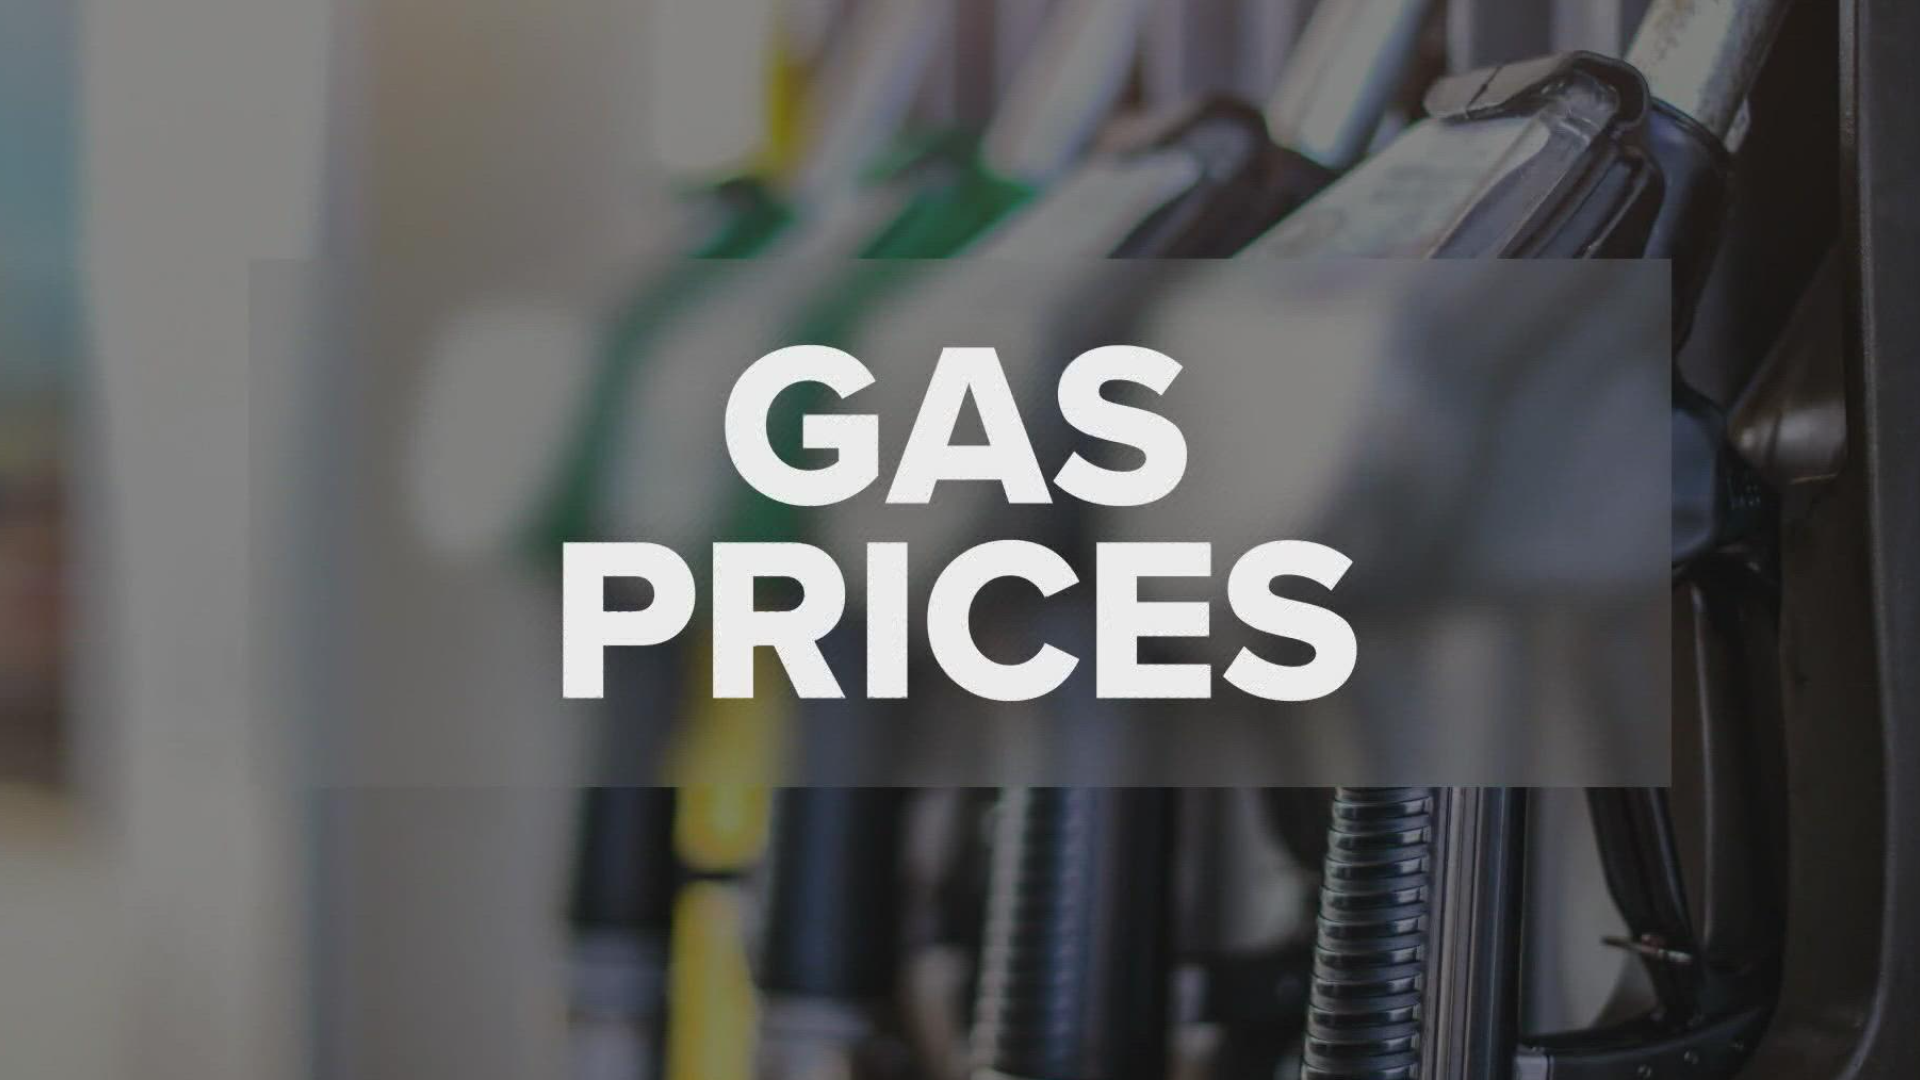 With high gas prices across the country, at issue is the 18.4 cents-a-gallon federal tax on gas and the 24.4 cents-a-gallon federal tax on diesel fuel.